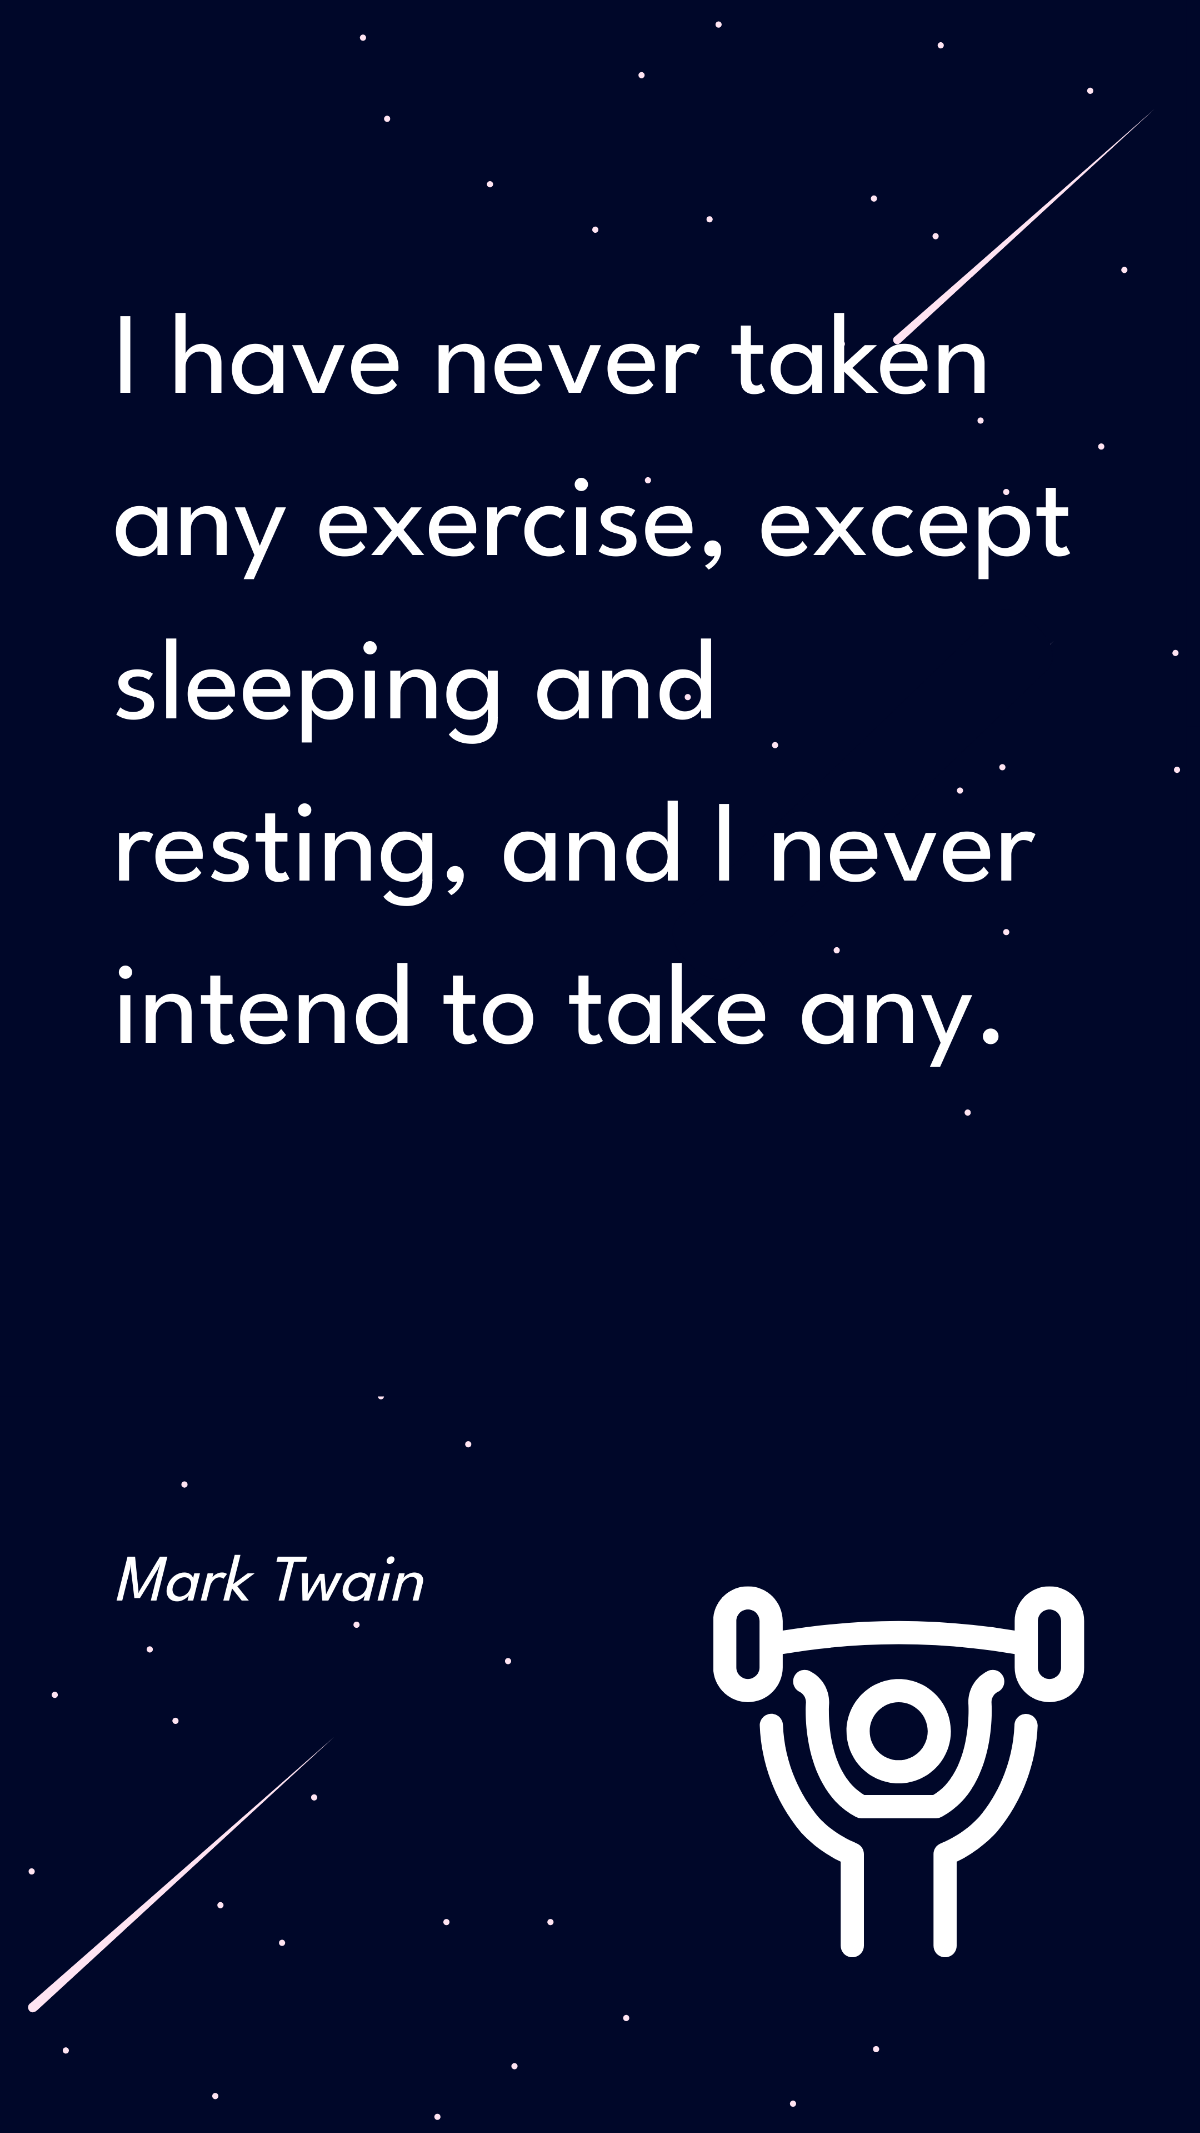 Free Mark Twain - I have never taken any exercise, except sleeping and resting, and I never intend to take any. Template